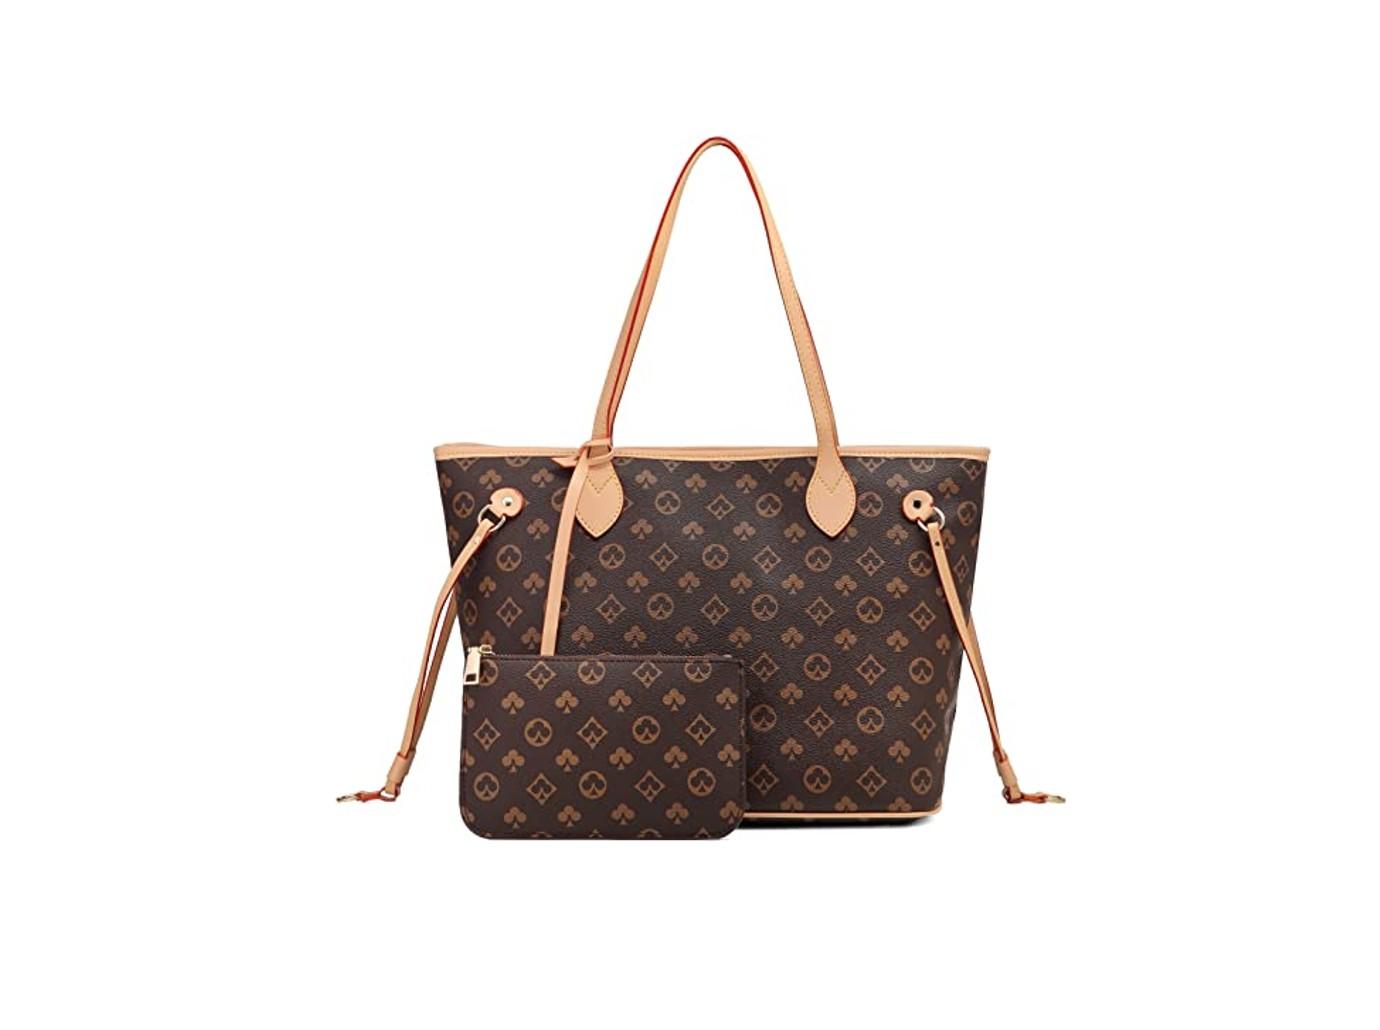 Boohoo Just Dropped The Perfect Louis Vuitton Duplicate